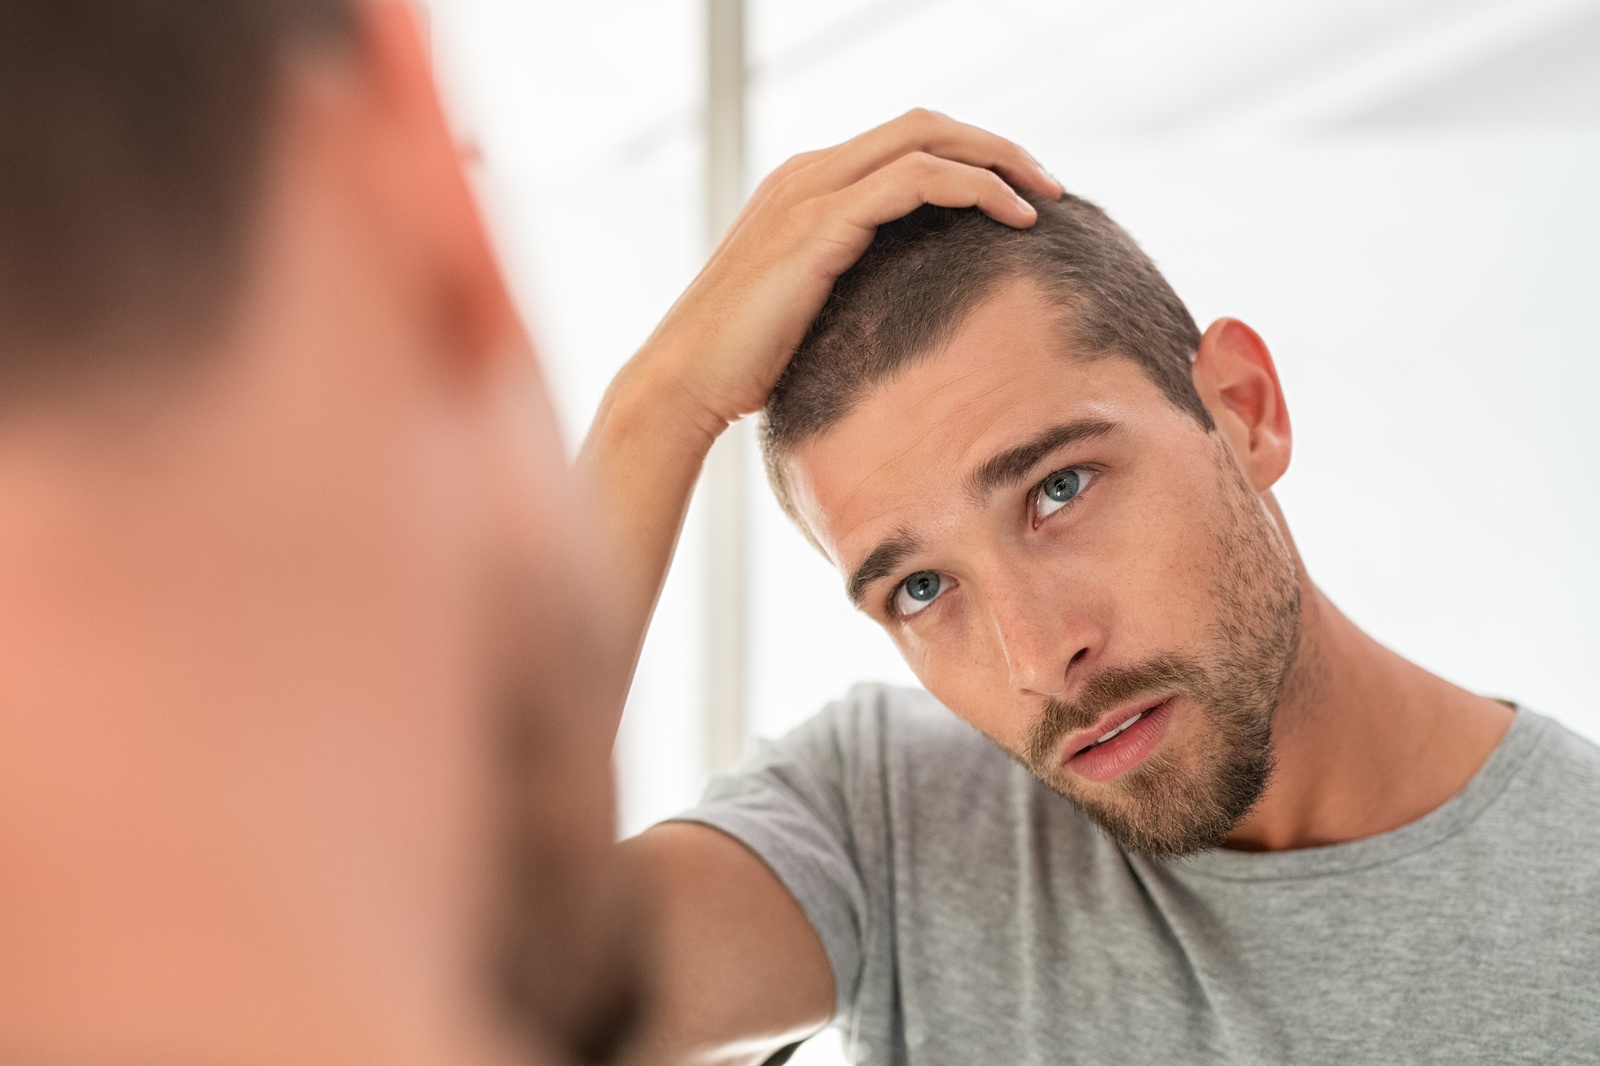 Everything You Need to Know About an FUT Hair Transplant